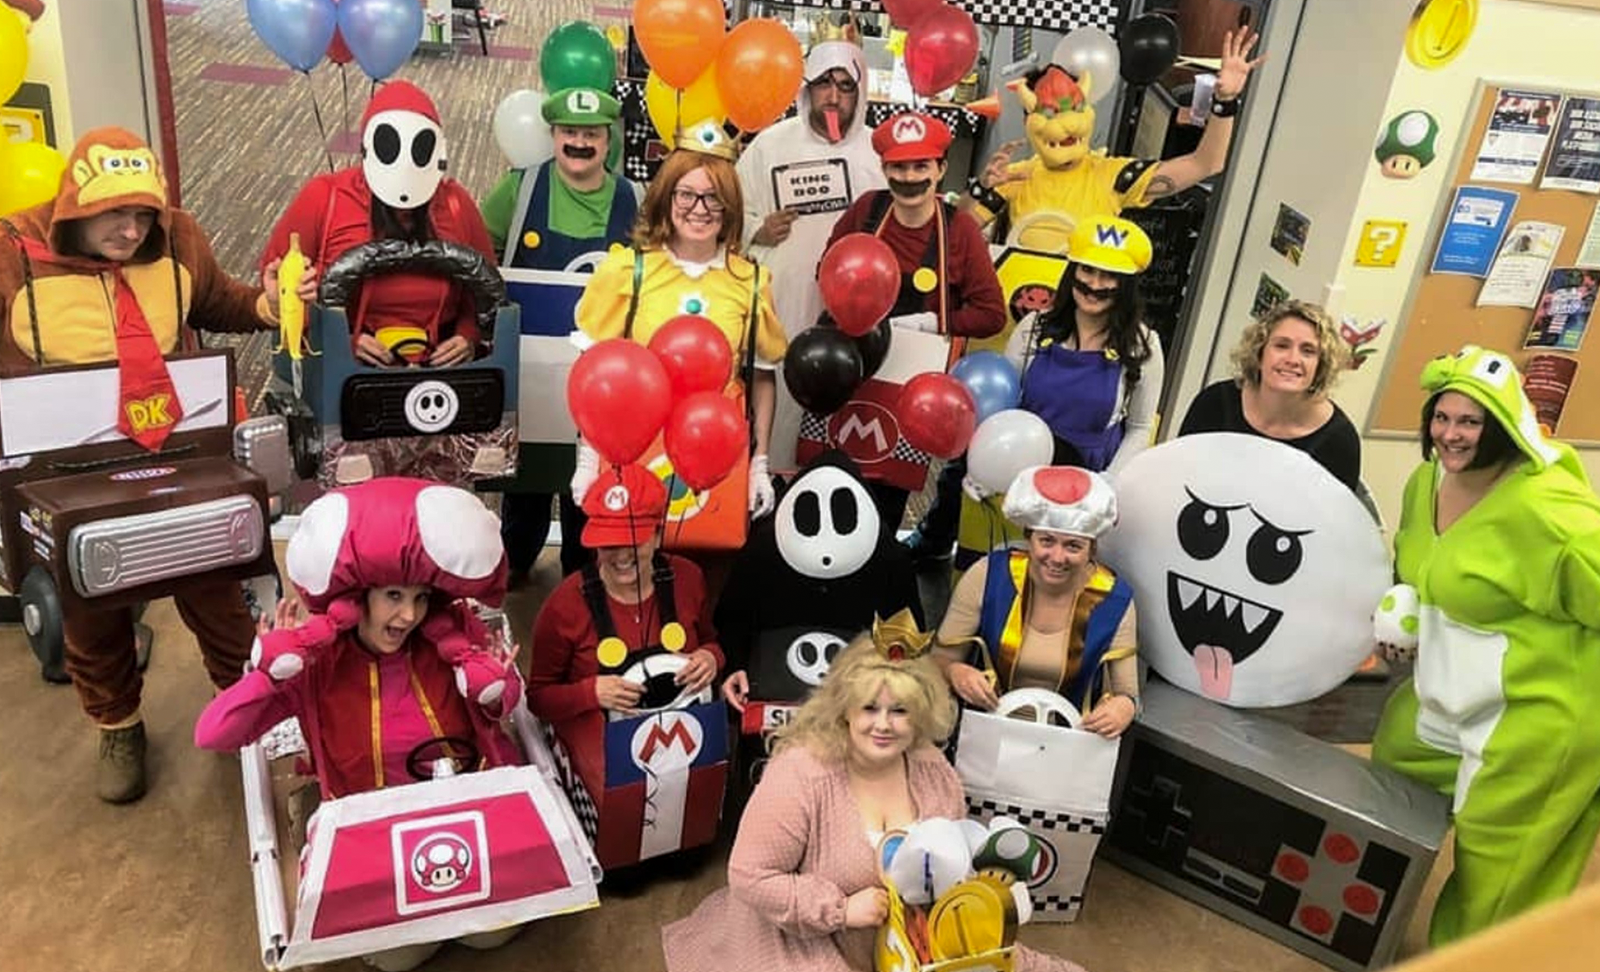 Members of the Students Affairs team dressed up on Halloween as characters from Mario Cart.